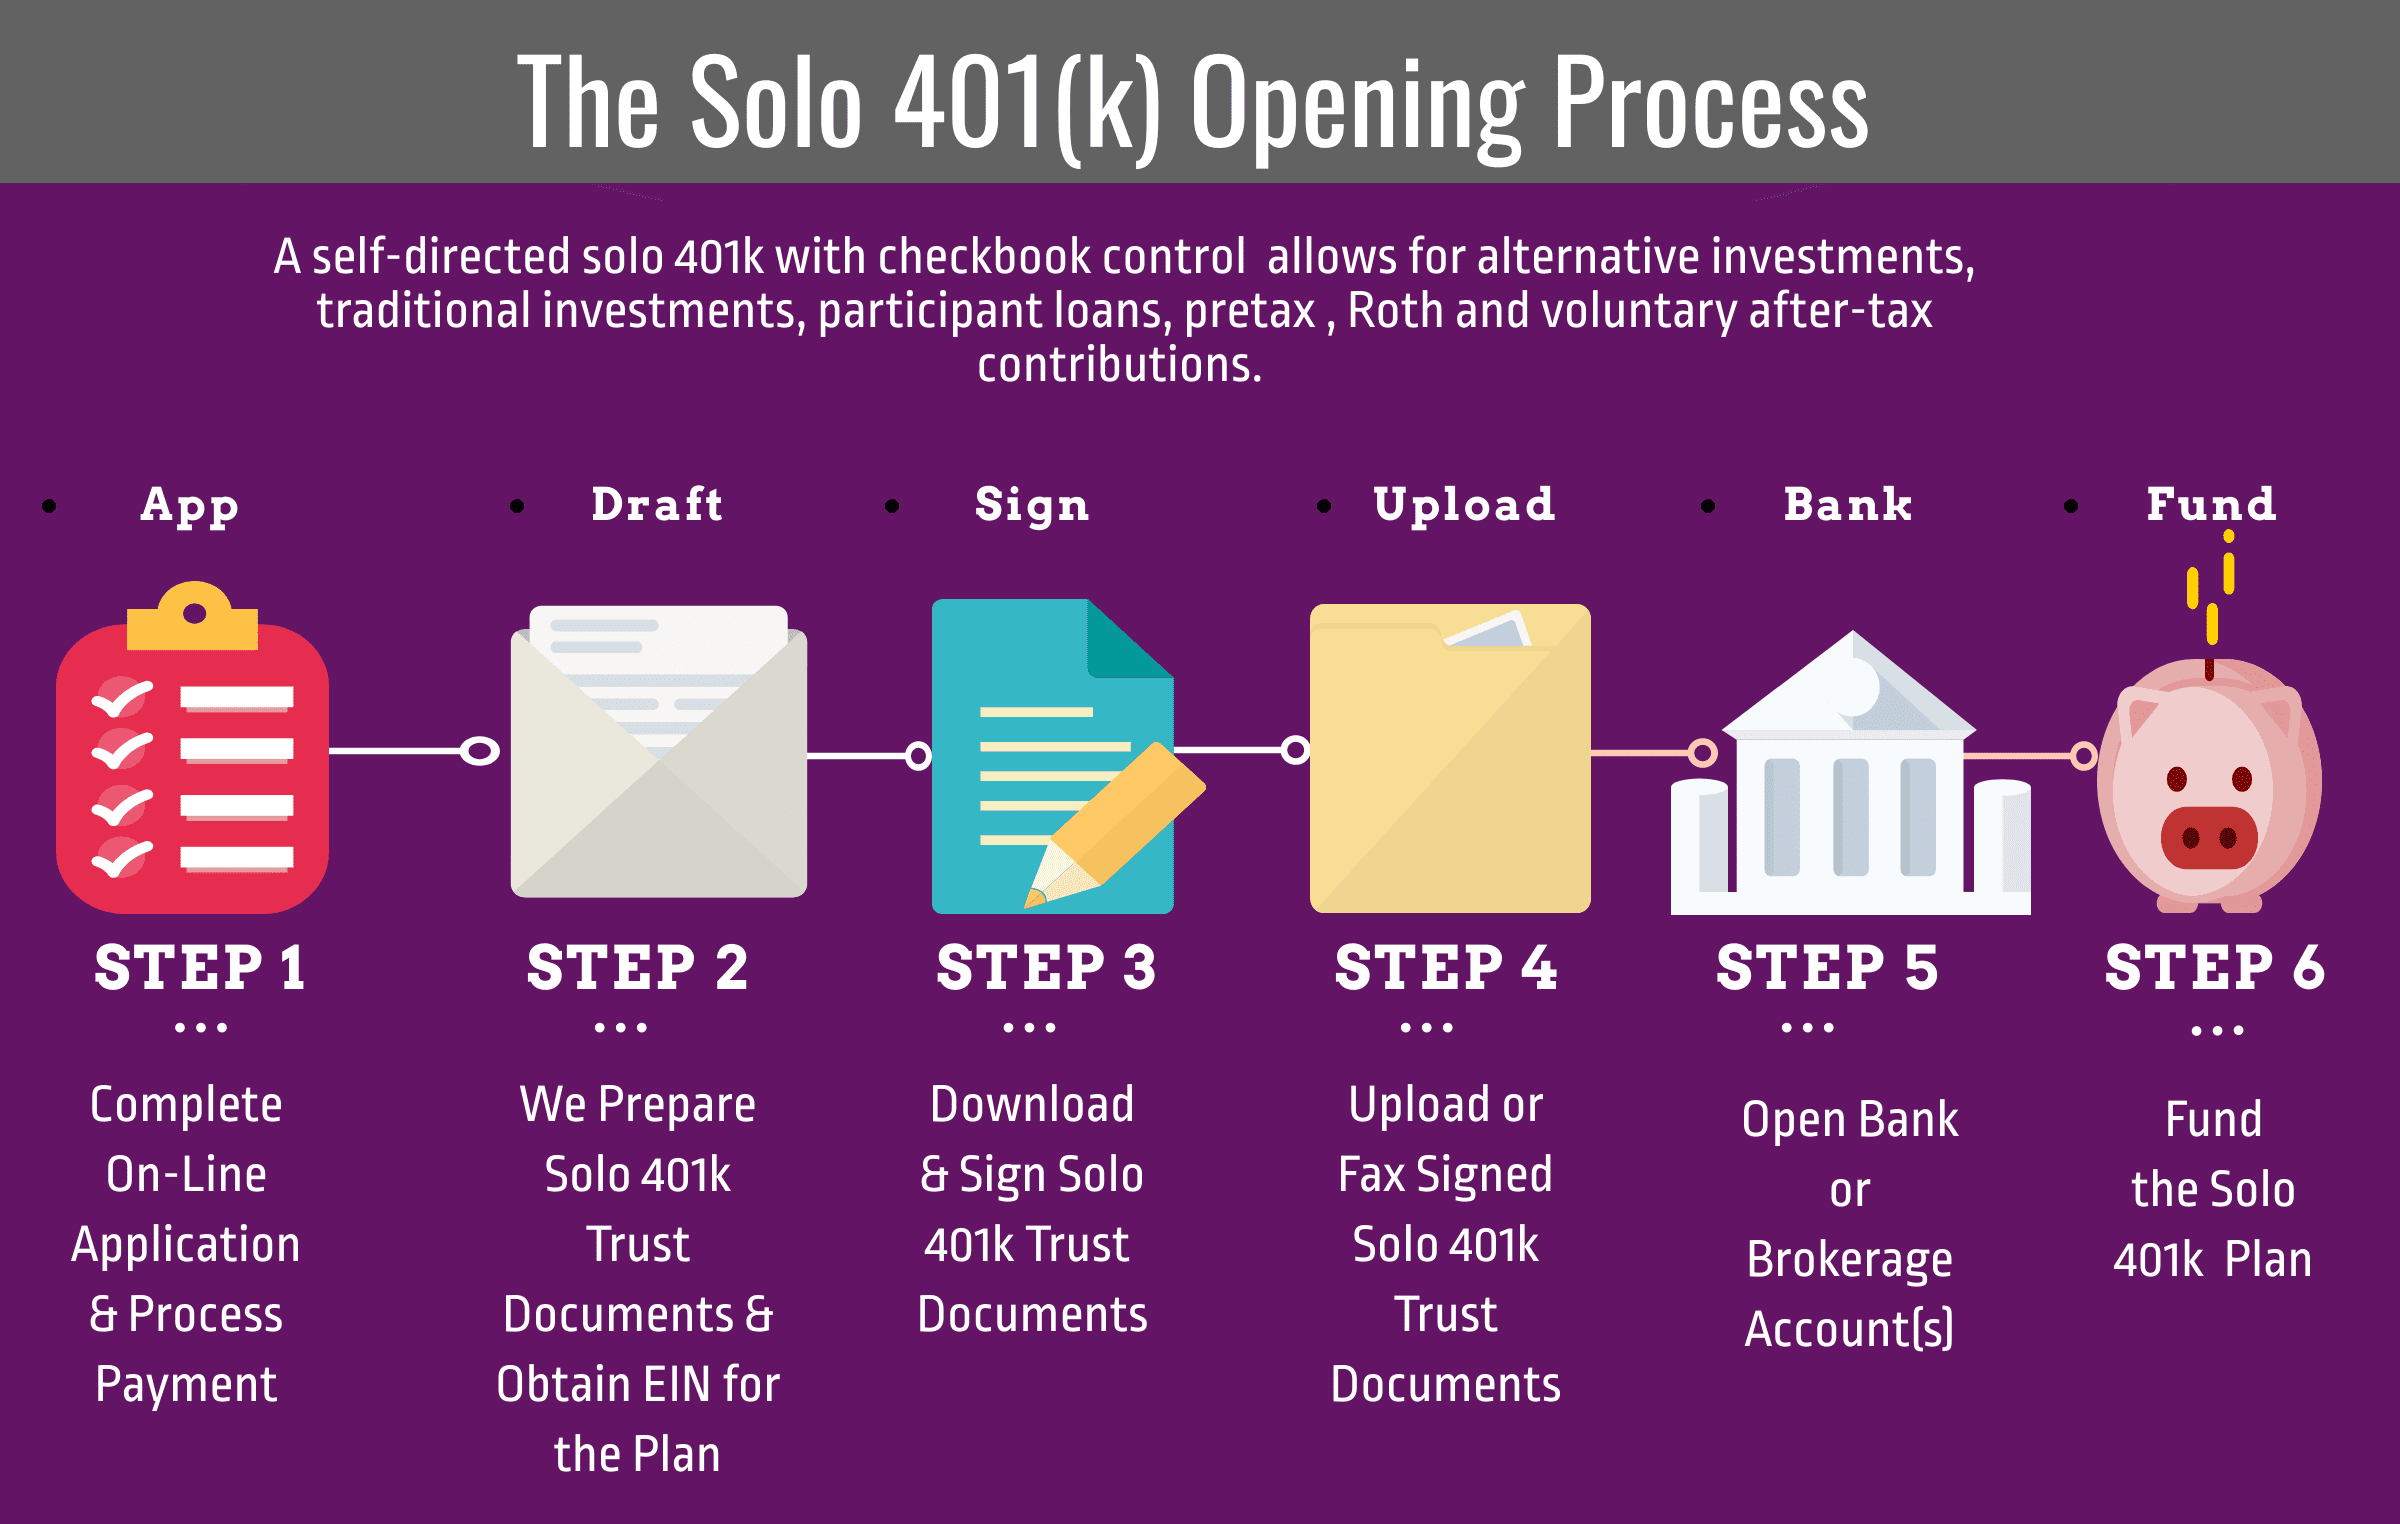 The Solo 401(k) Opening Process